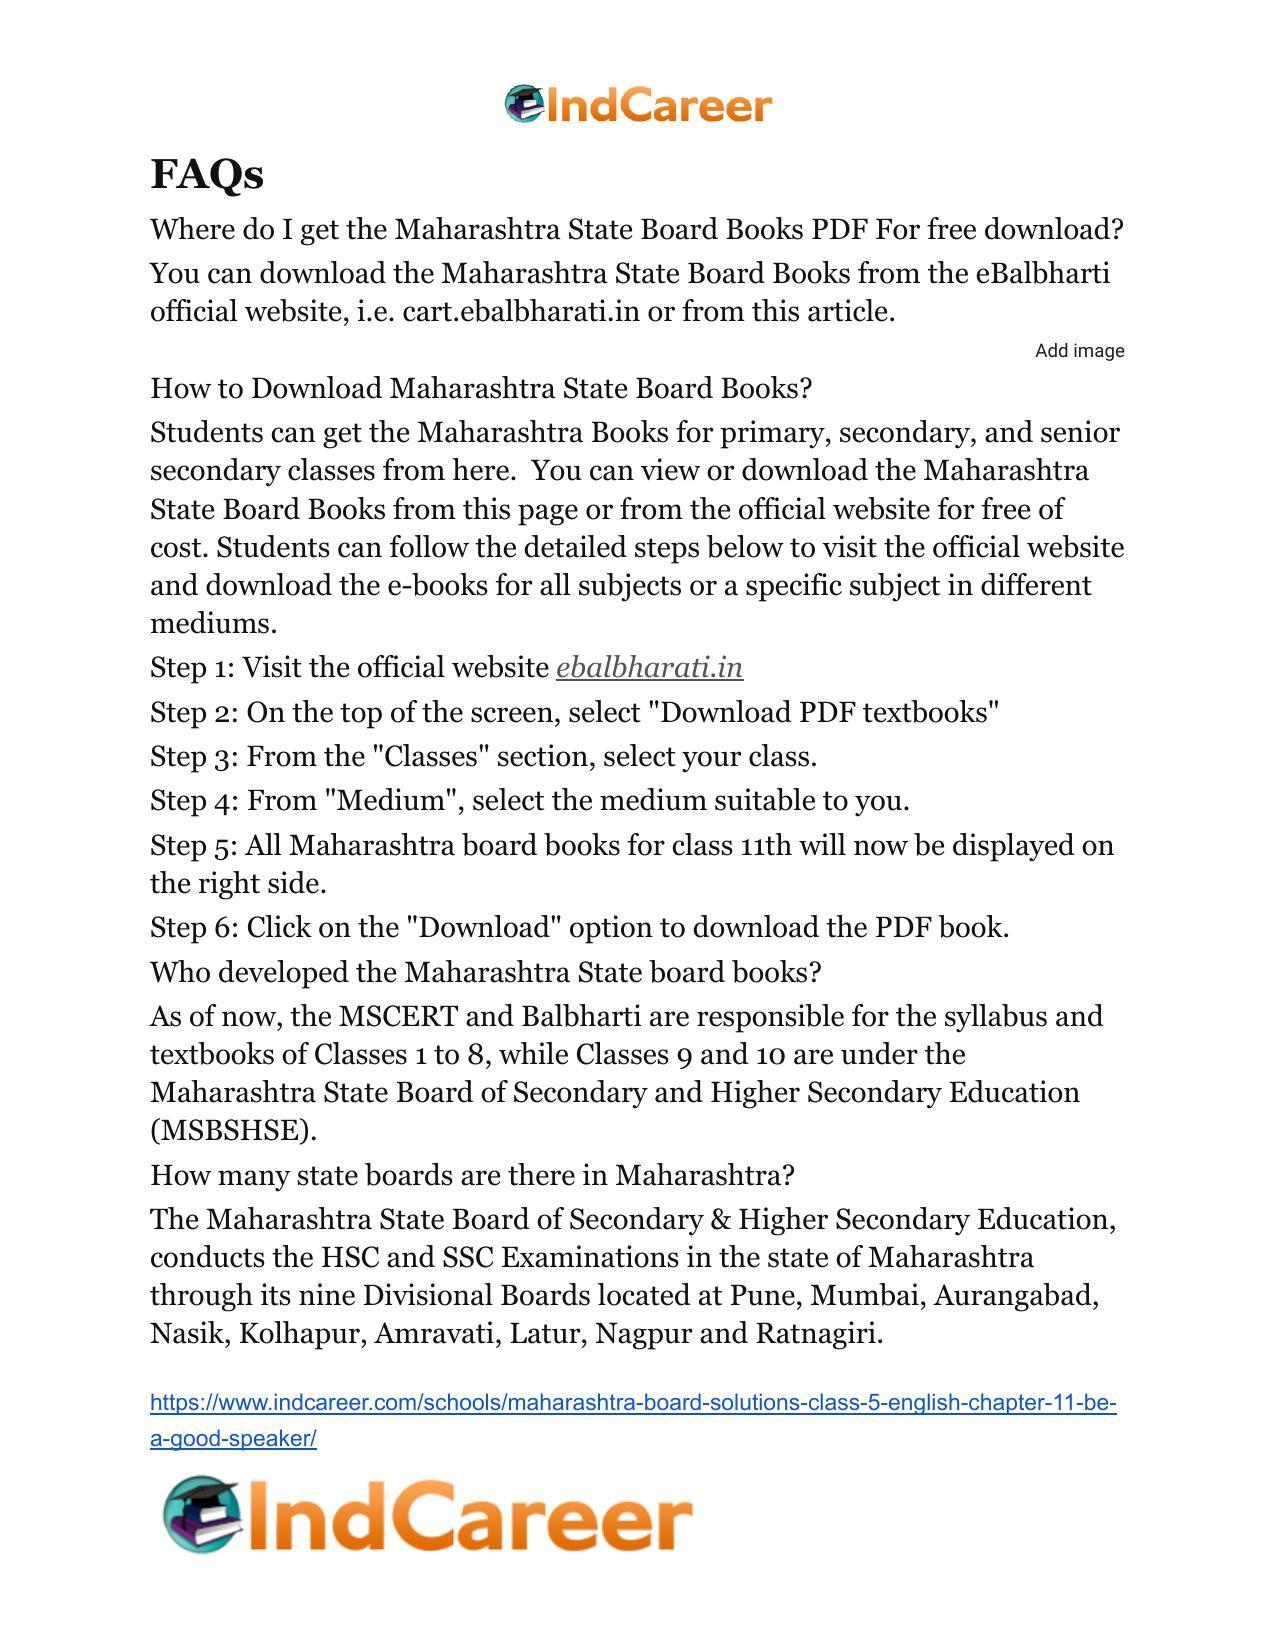 Maharashtra Board Solutions Class 5-English: Chapter 11- Be a Good Speaker - Page 11